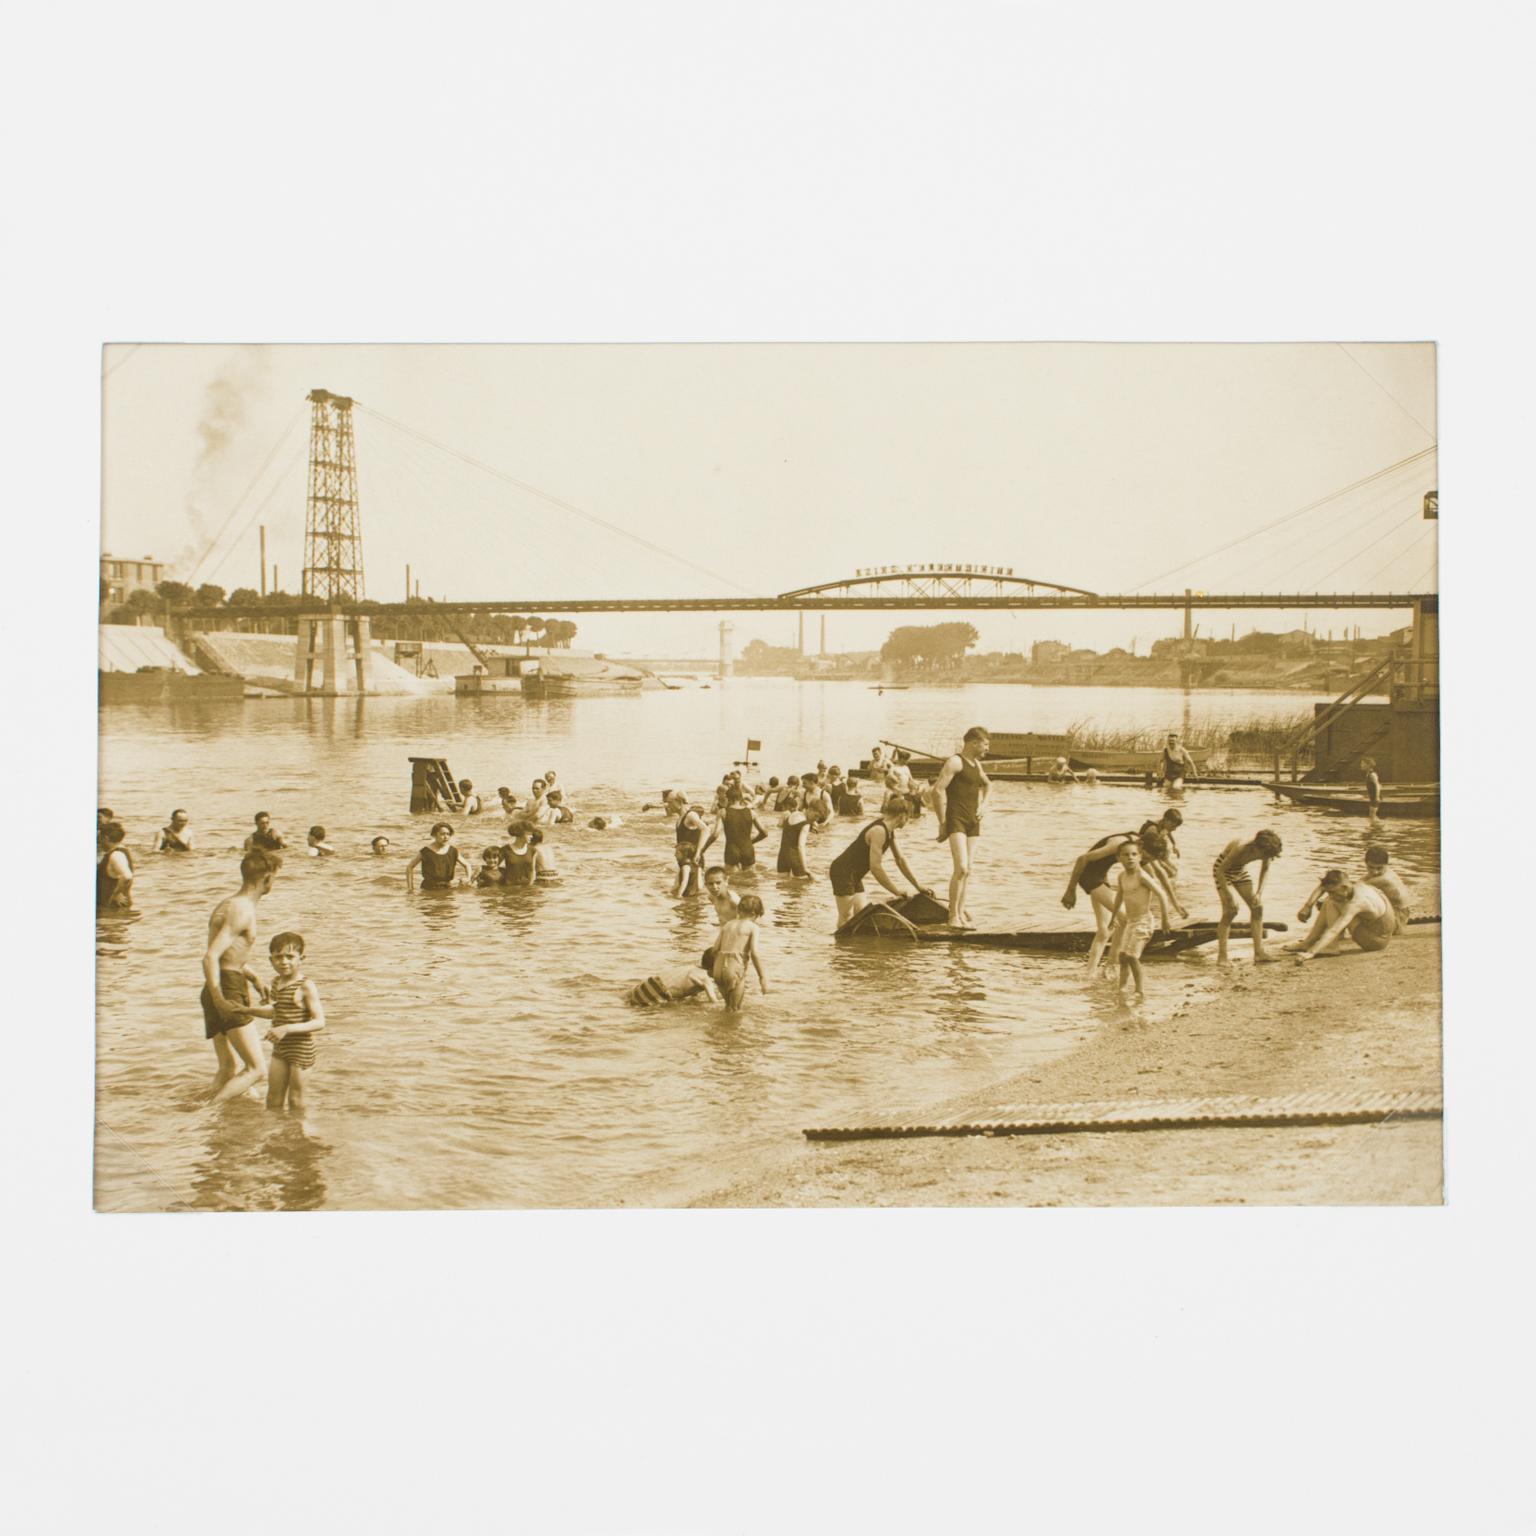 An original silver gelatin black and white photograph by Press Agency ROL, Paris 1929. Summer on the beach near Paris.
Features:
Original silver gelatin print photography unframed.
Press photograph.
Press agency: ROL Paris.
Photographer: G.